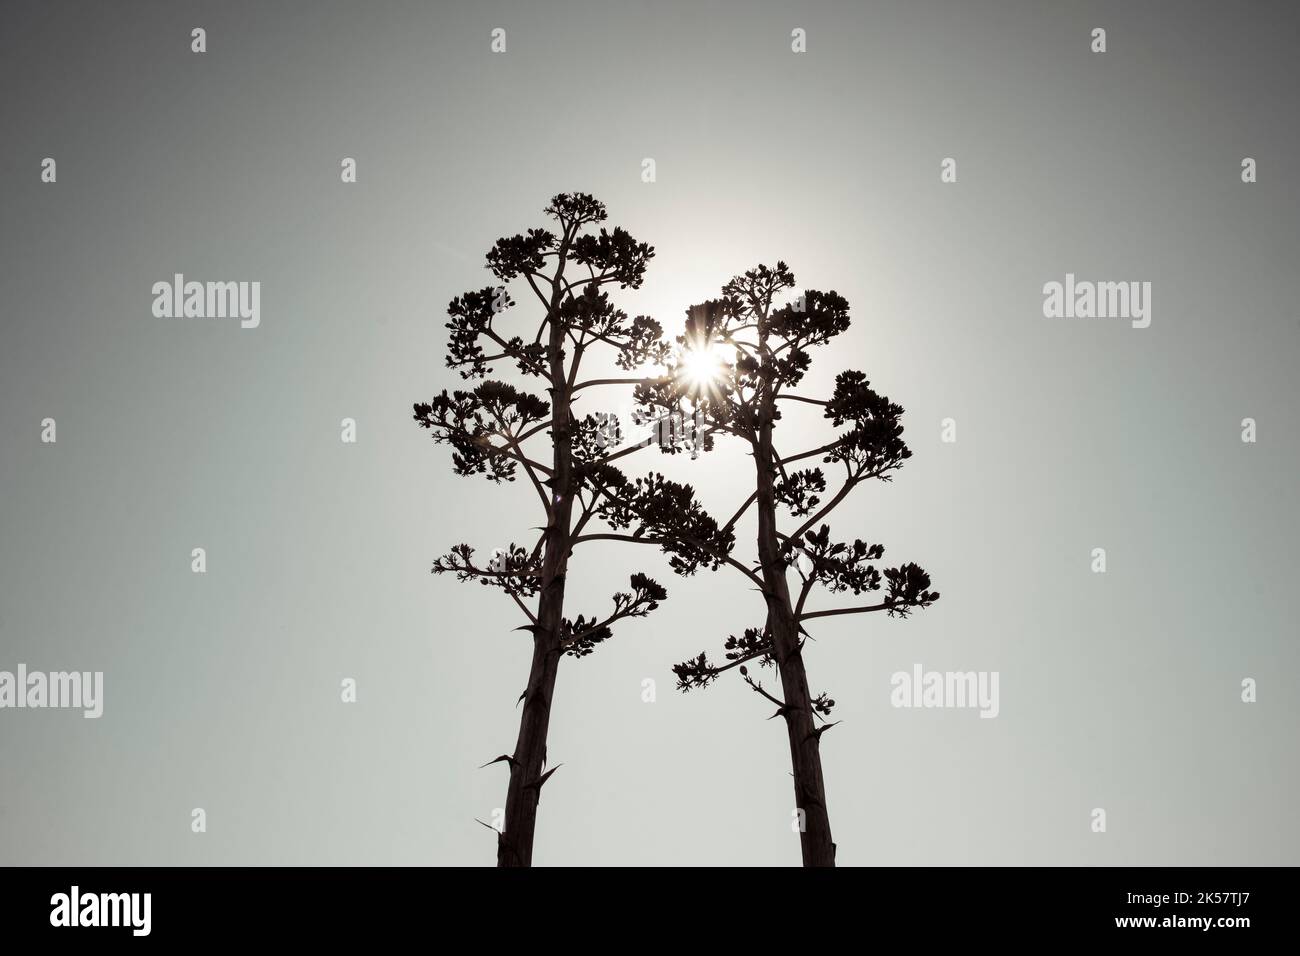 Two Agave salmiana vertical floral stem in silhouette with gray toning. Low angle view. Stock Photo